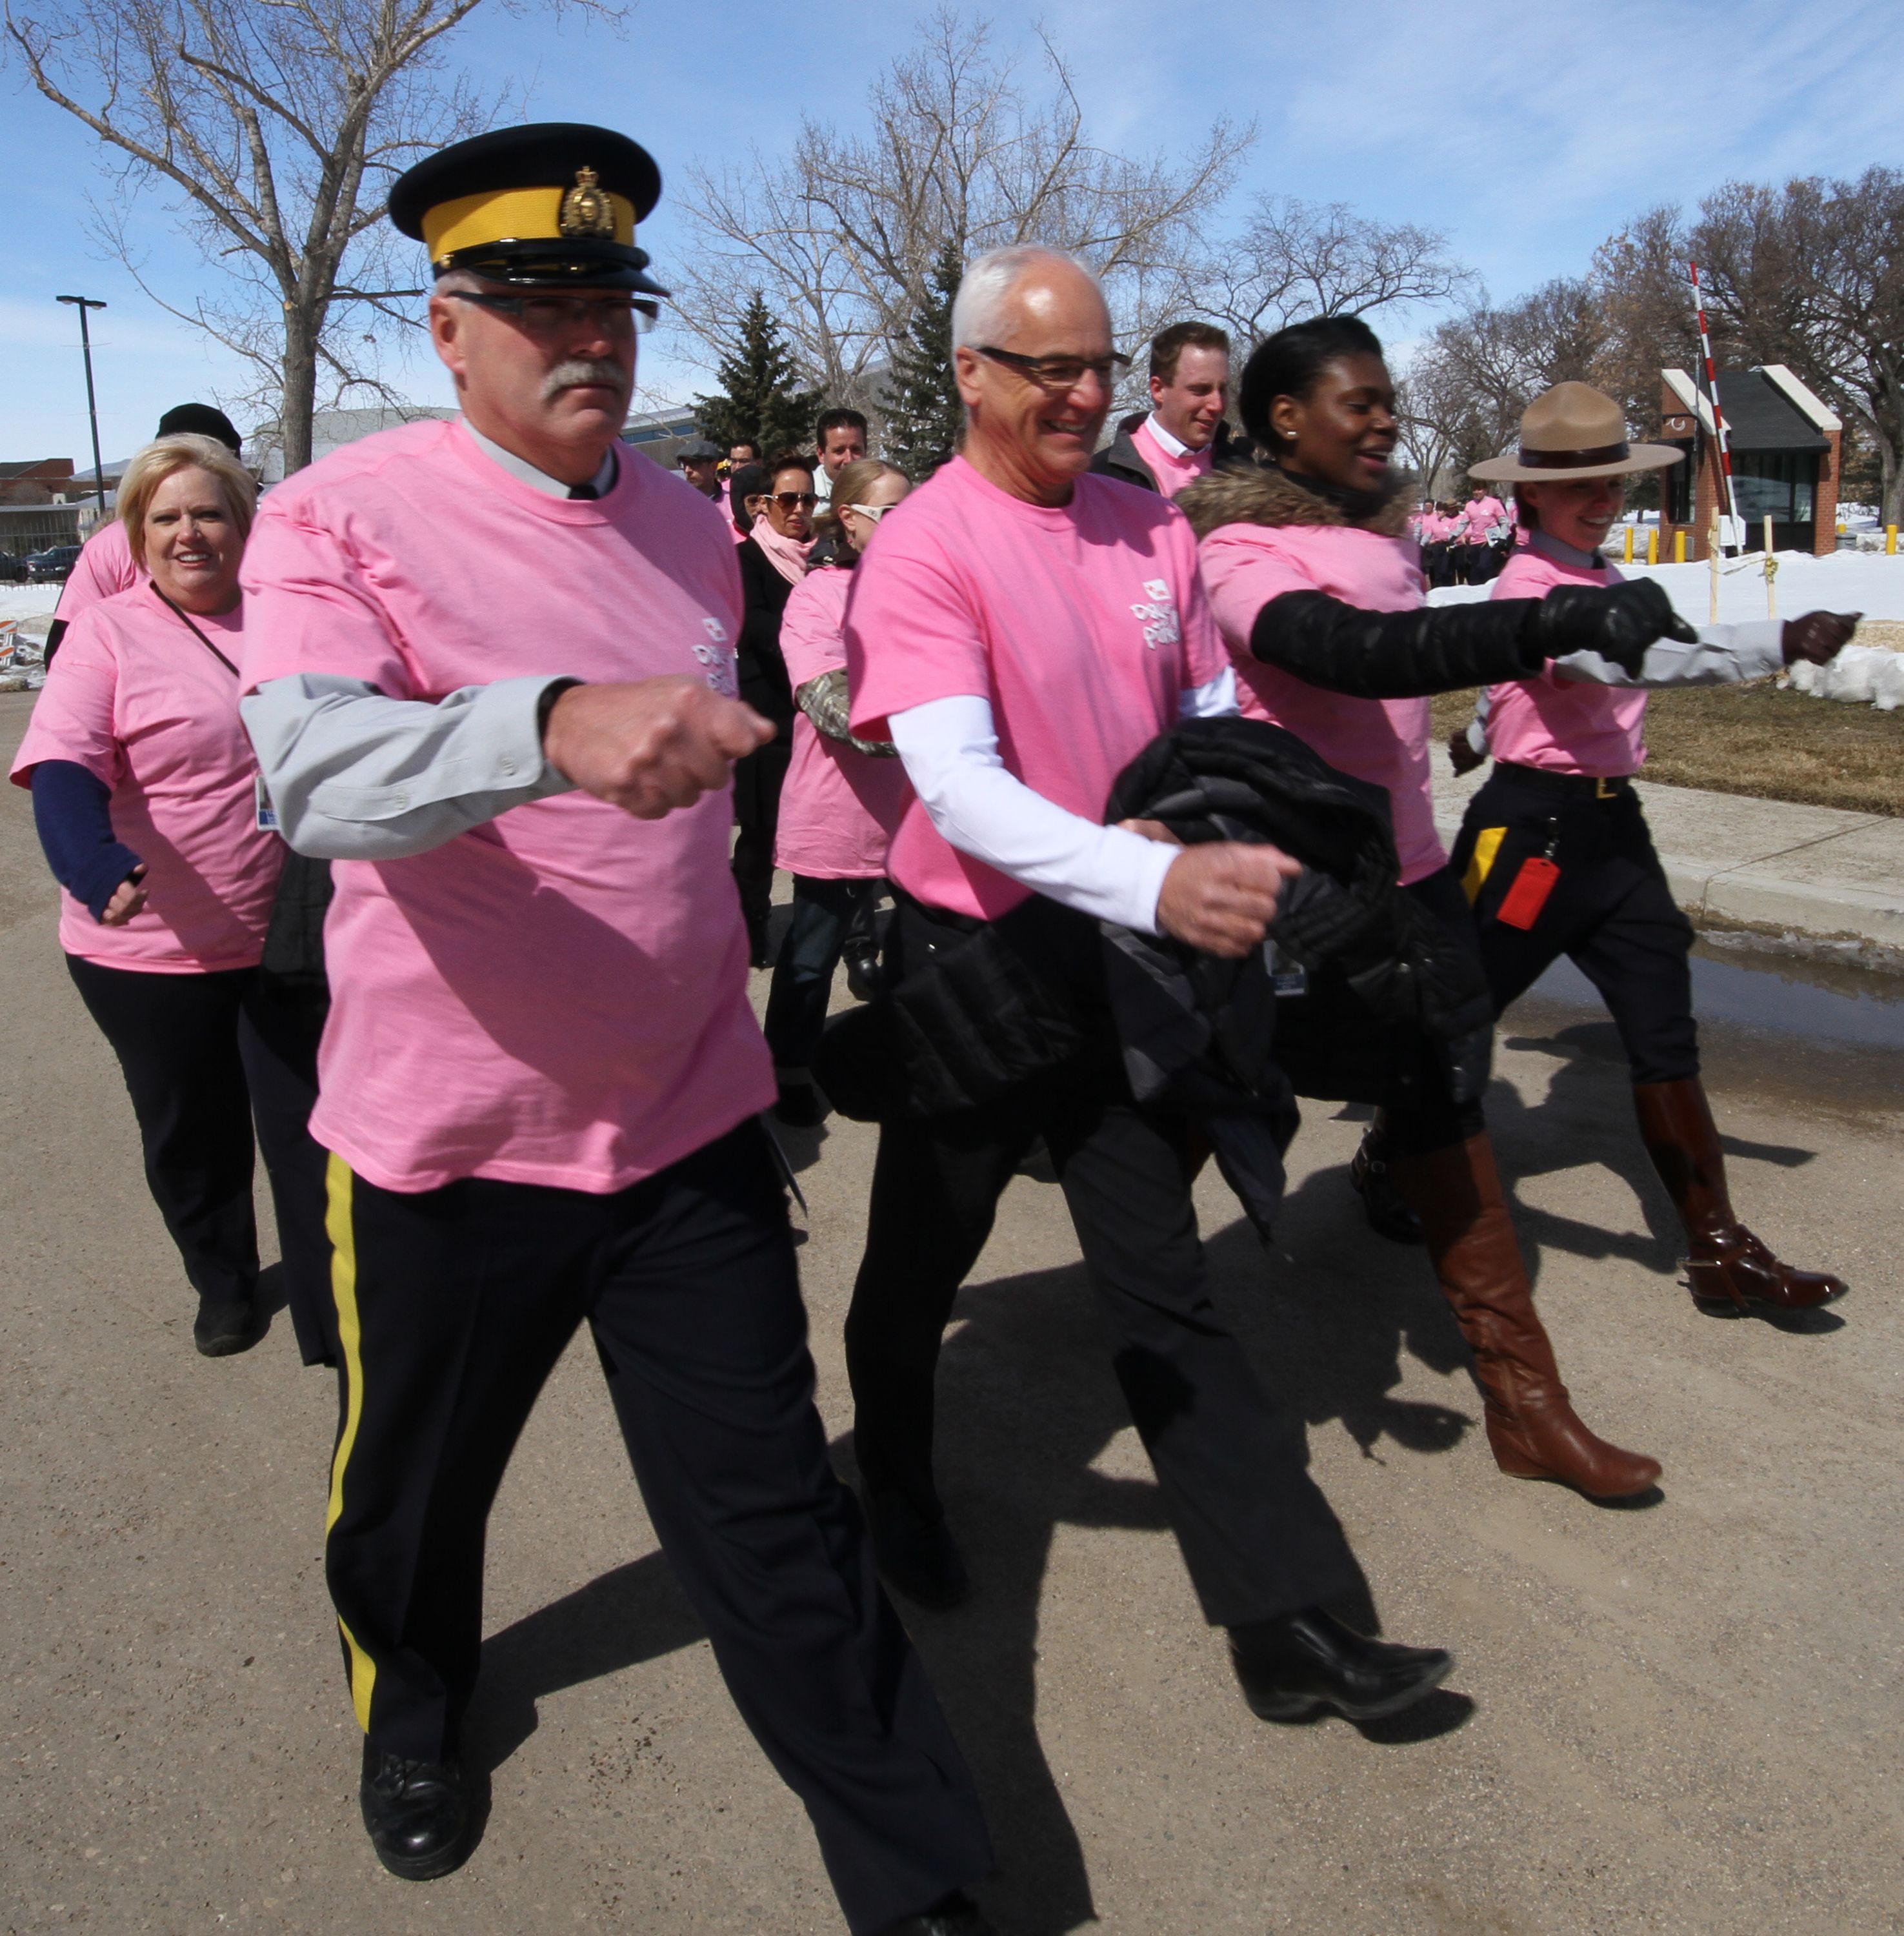 Almost 400 RCMP Cadets and officers marched against bullying.